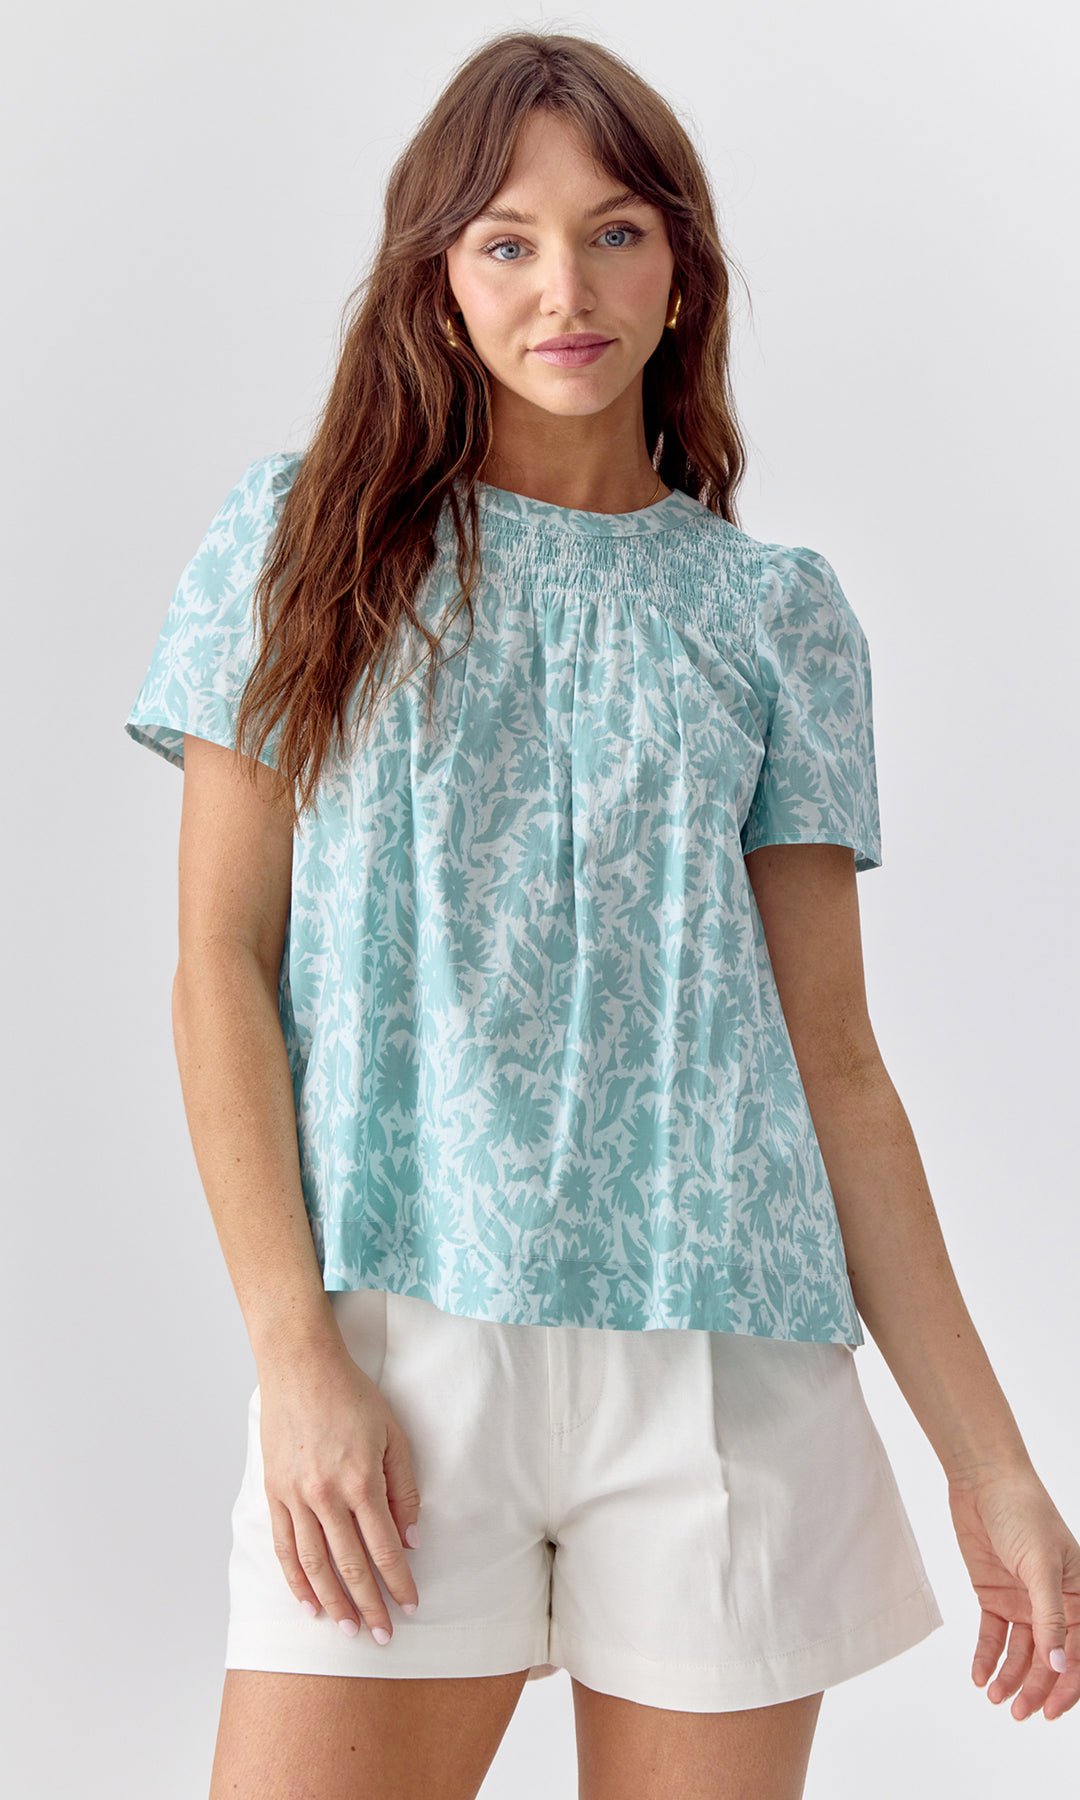 Greylin - Enata Smocked Printed Top: Mint - Shorely Chic Boutique